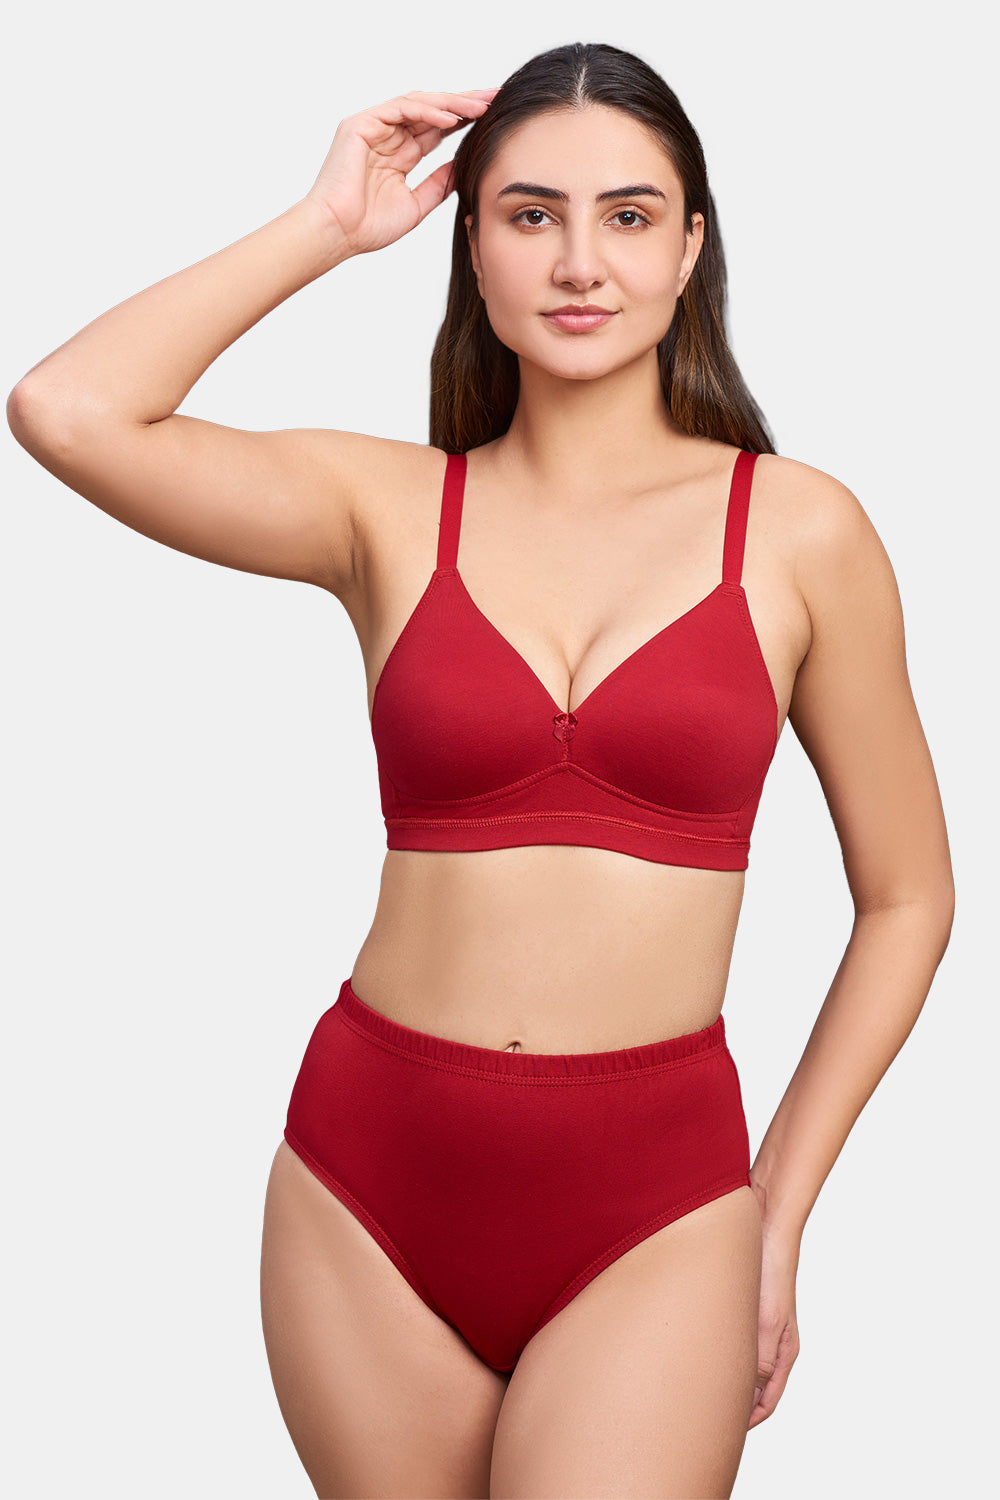 Lingerie Paradise Plain Red Cotton Panties, Size: Small at Rs 42